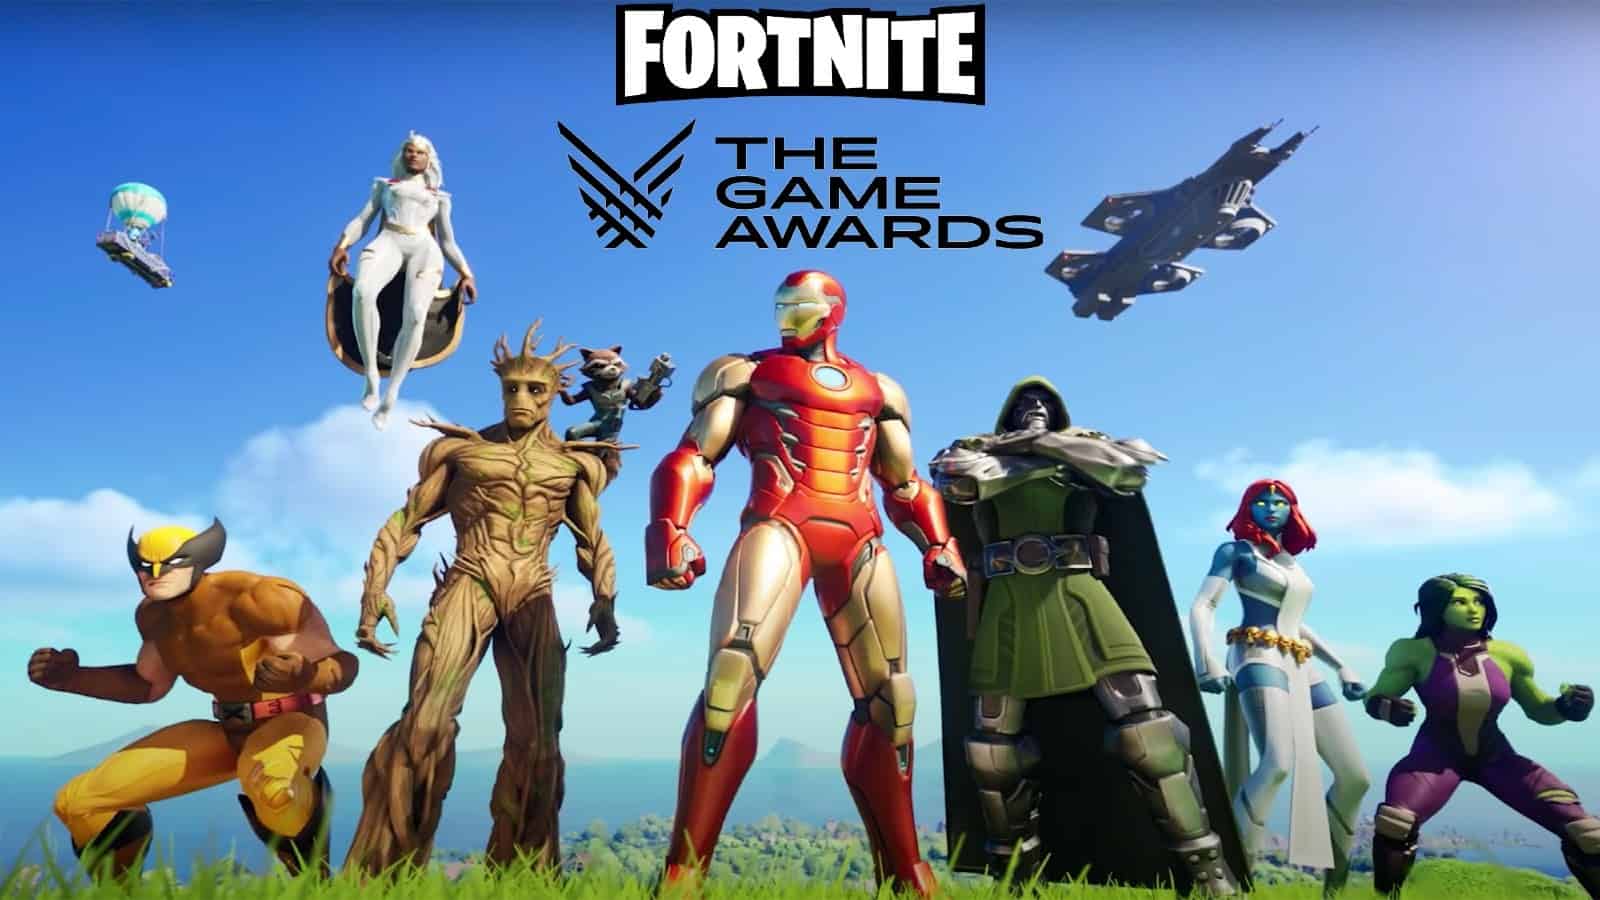 The Game Awards Nominate Fortnite For Three Categories, Including Best Esports Game